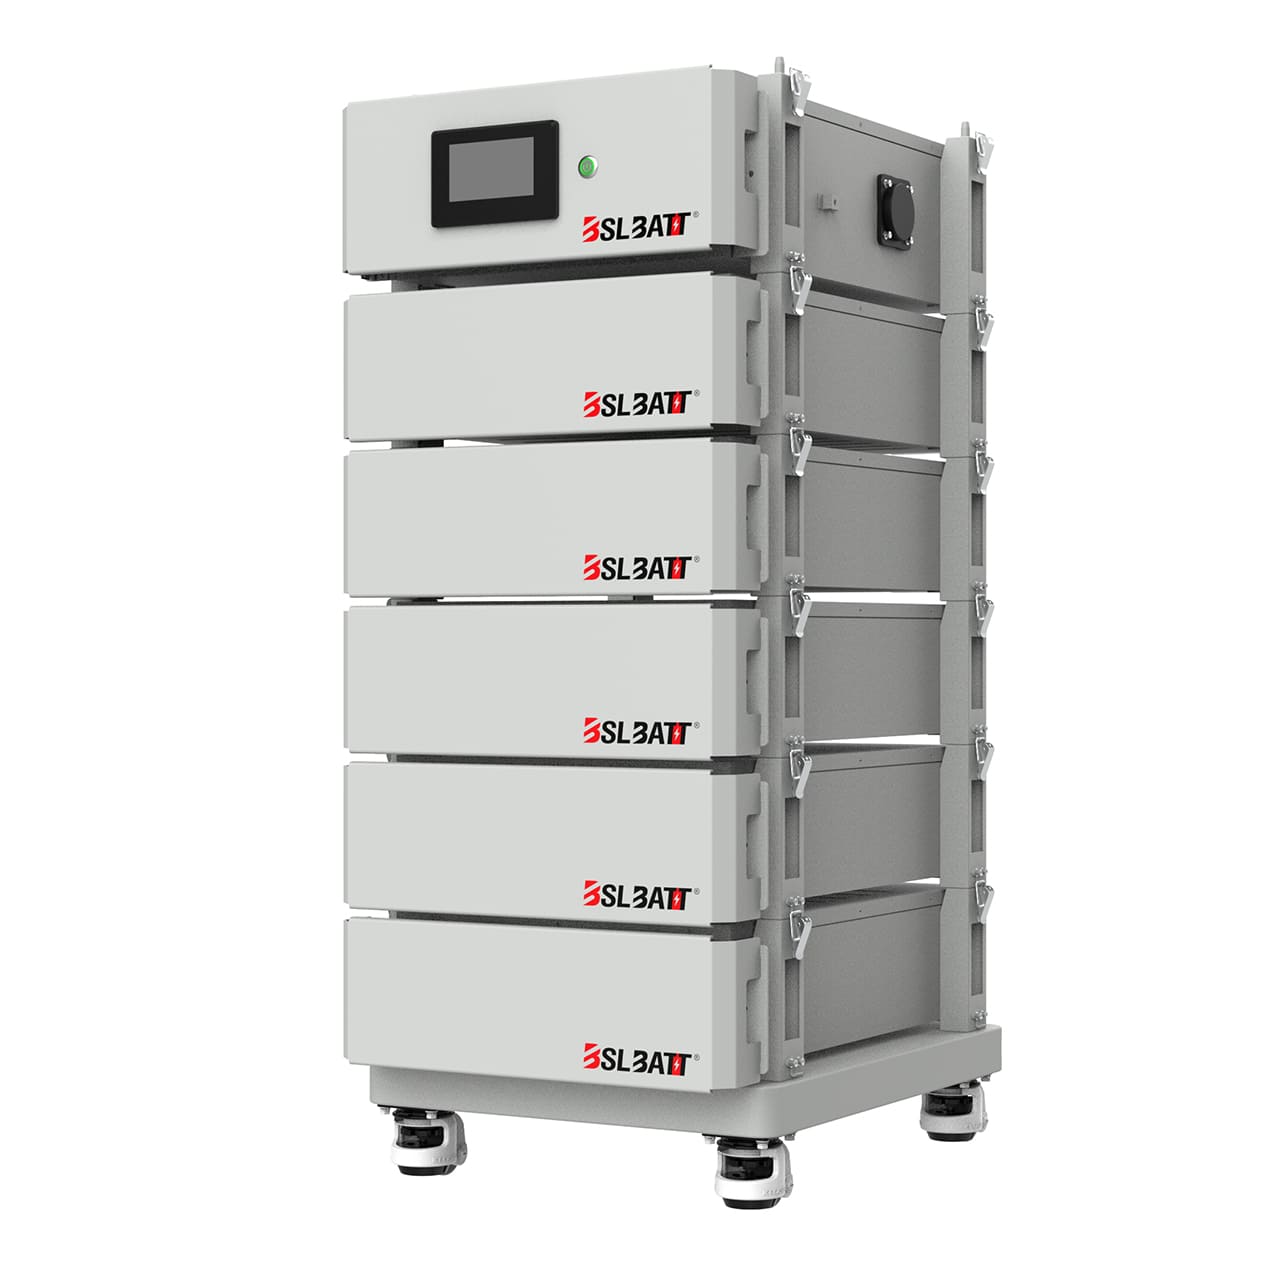 25kWh Battery High Voltage LiFePO4 19” Rack Mounted